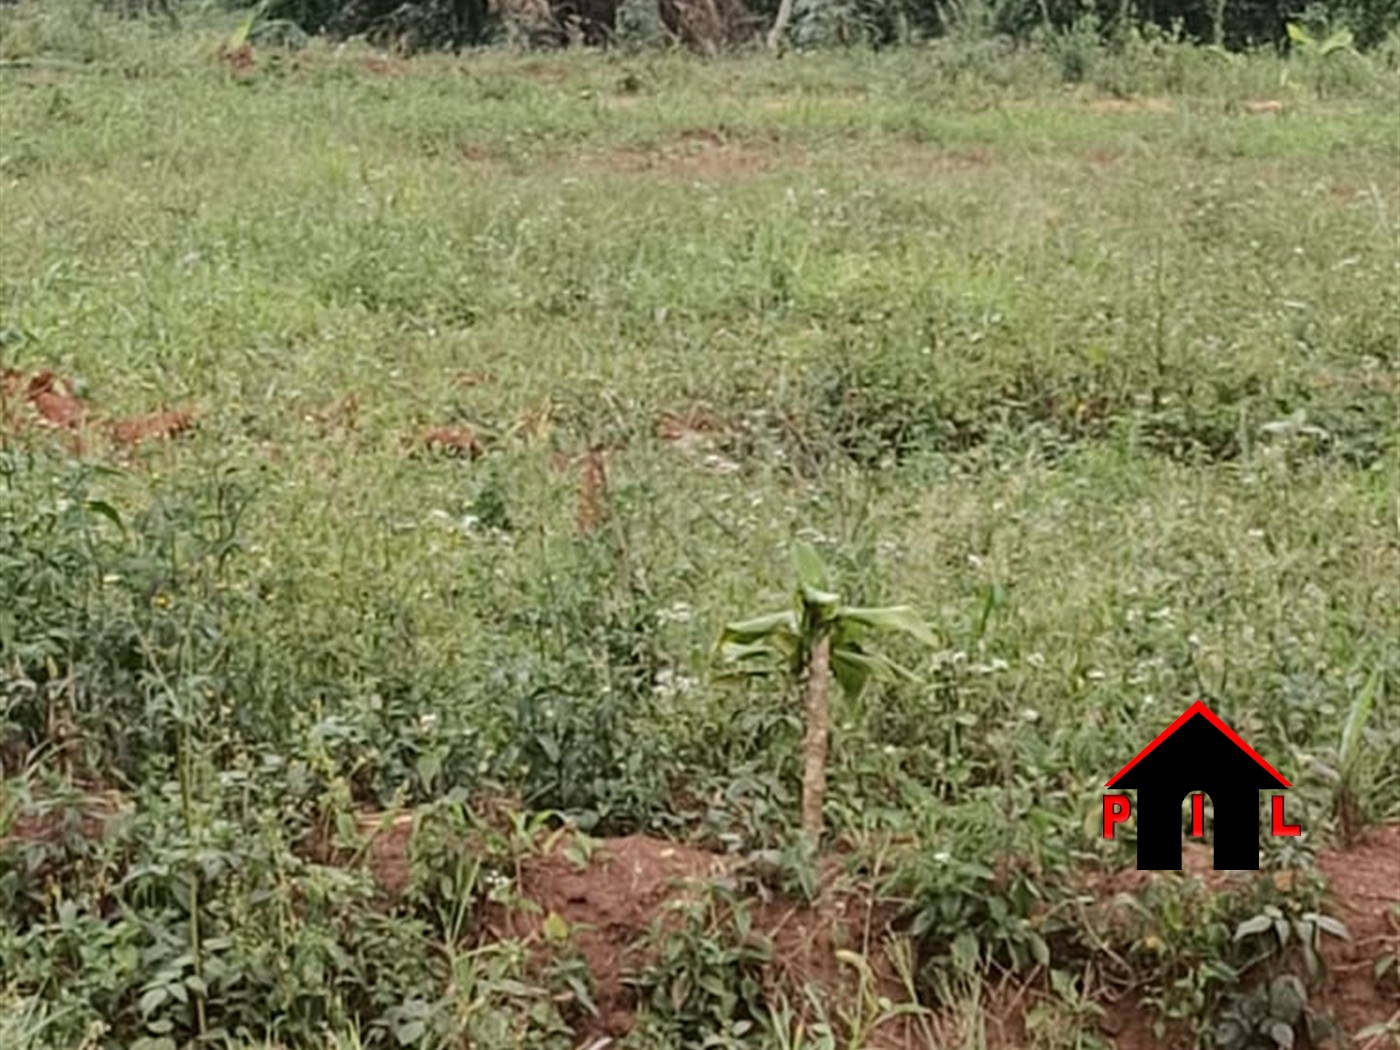 Commercial Land for sale in Namugongo Kampala